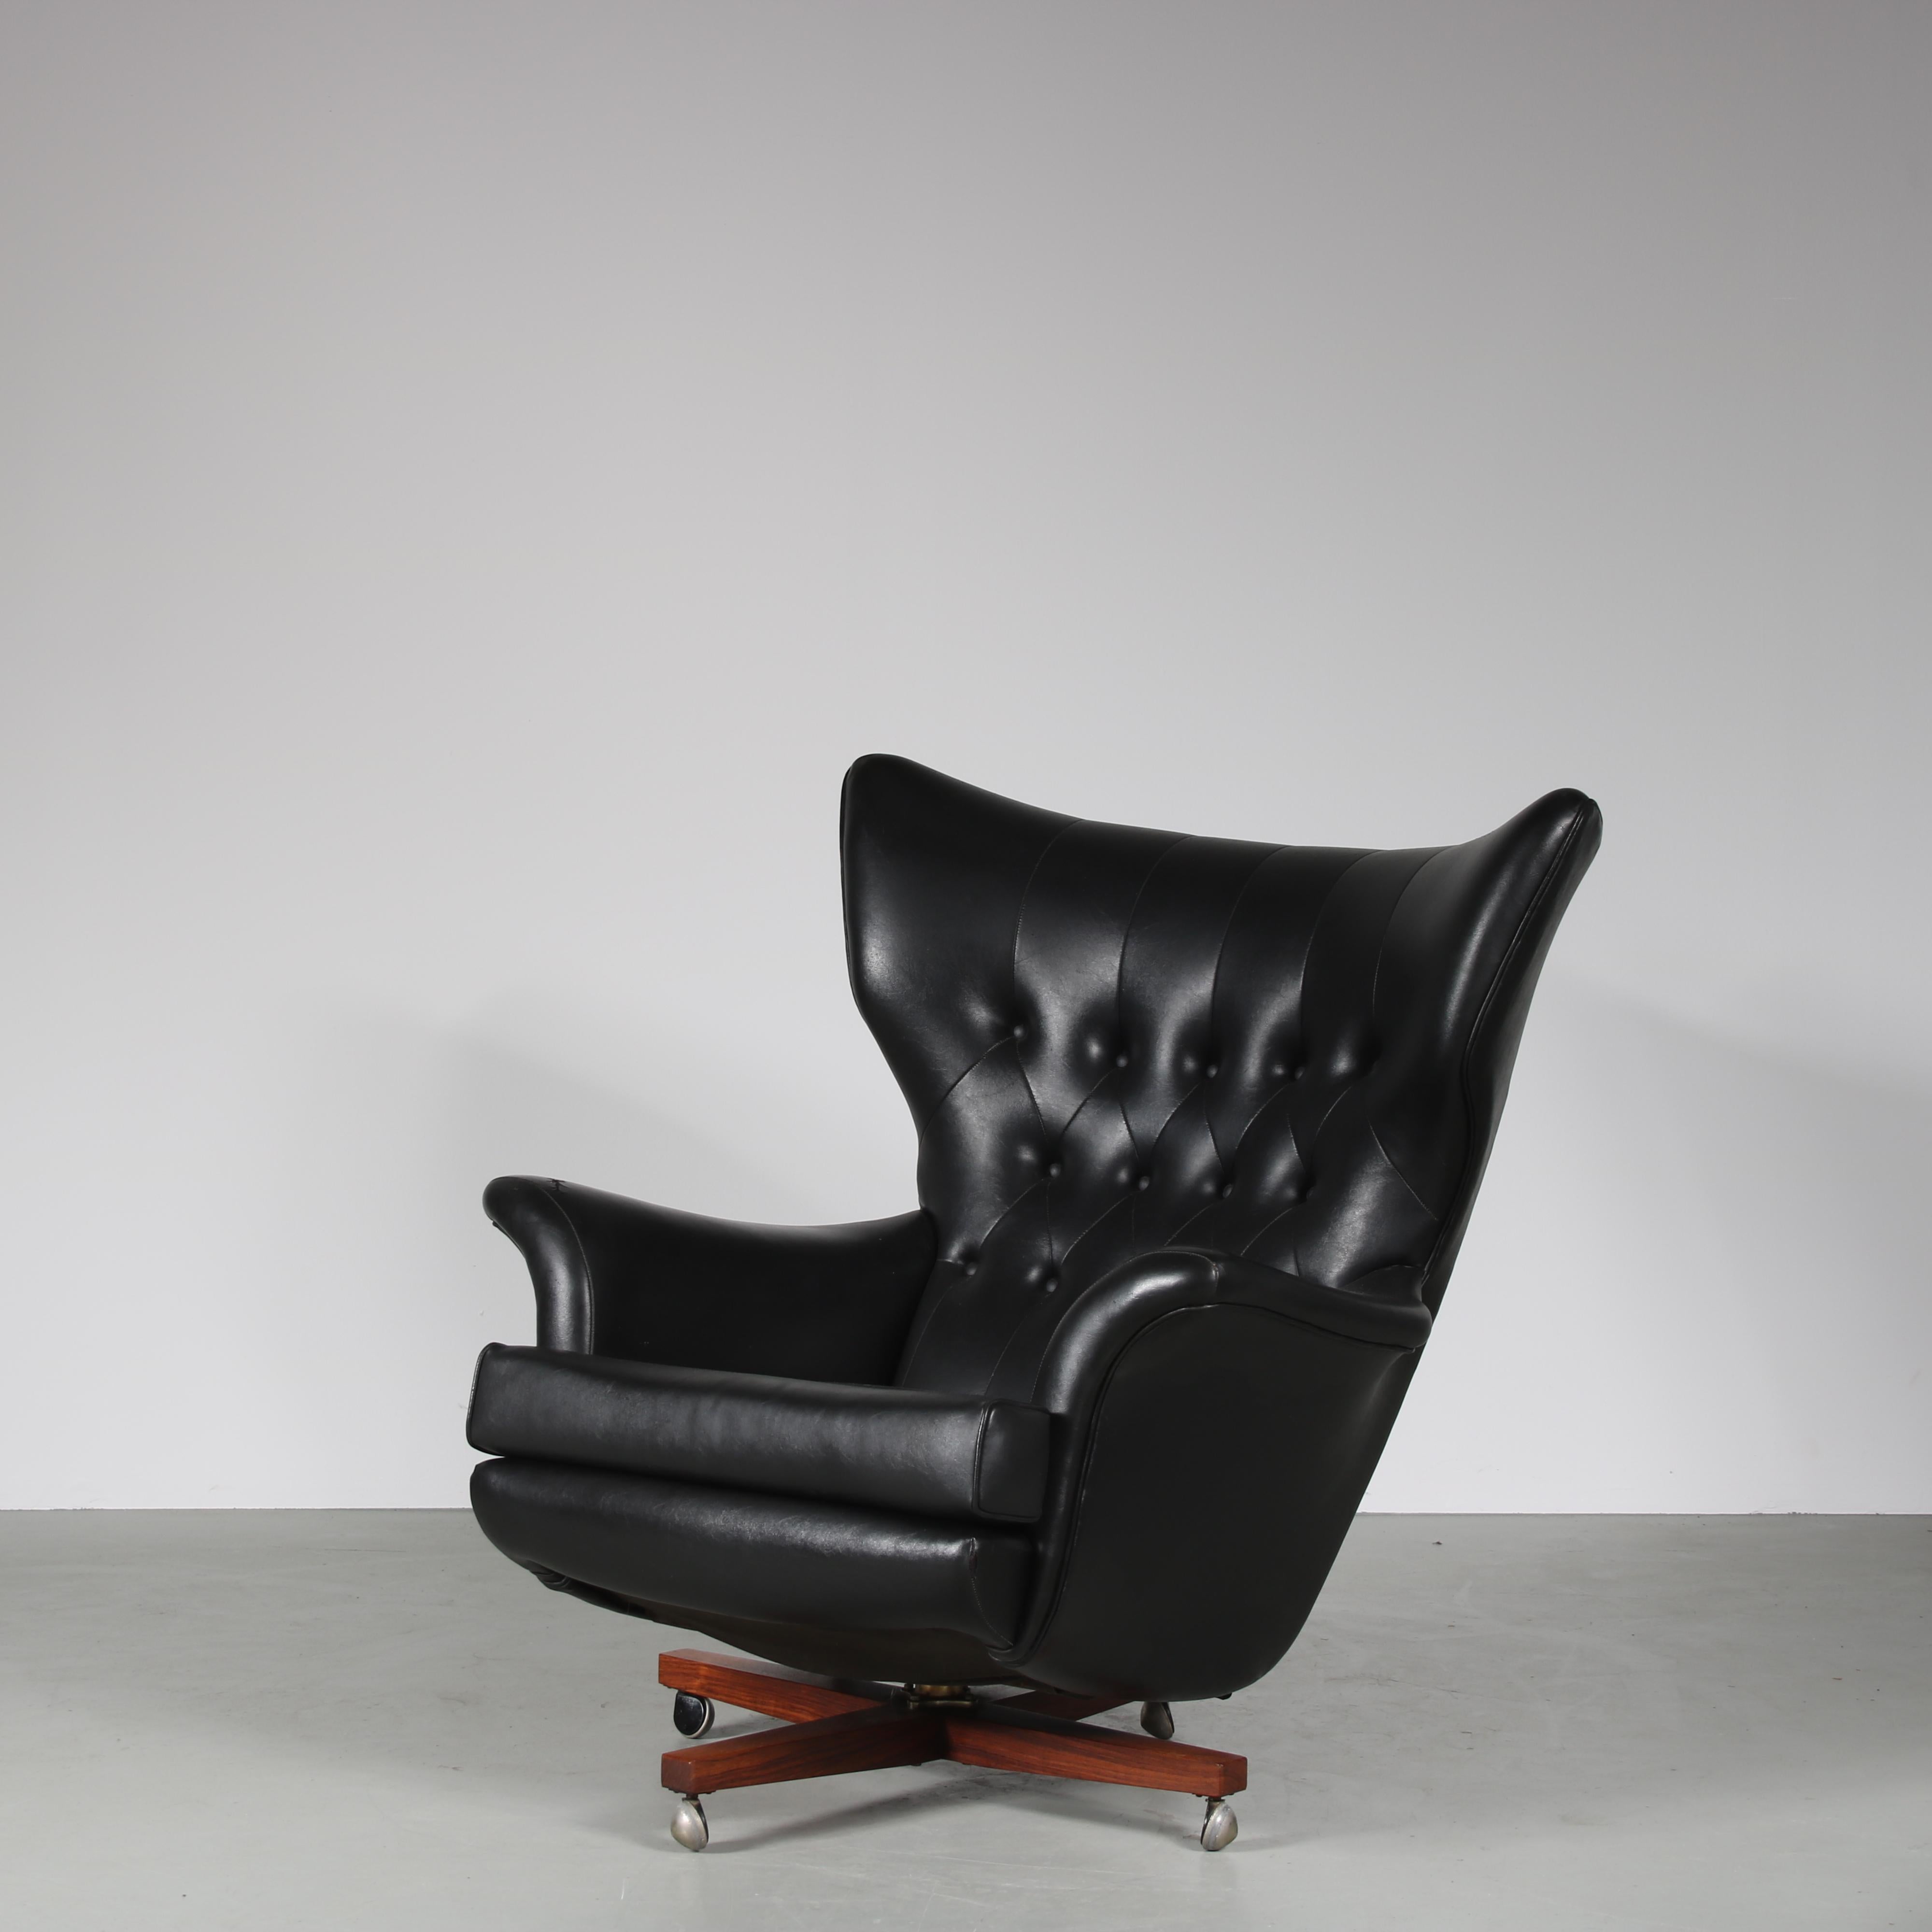 This is an eye-catching and iconic lounge chair, the model 6250 “Villain Chair” manufactured by G-Plan in the United Kingdom around 1960.

Possibly one of the most famous chairs ever to be captured on celluloid, supervillain Blofeld’s chair in the